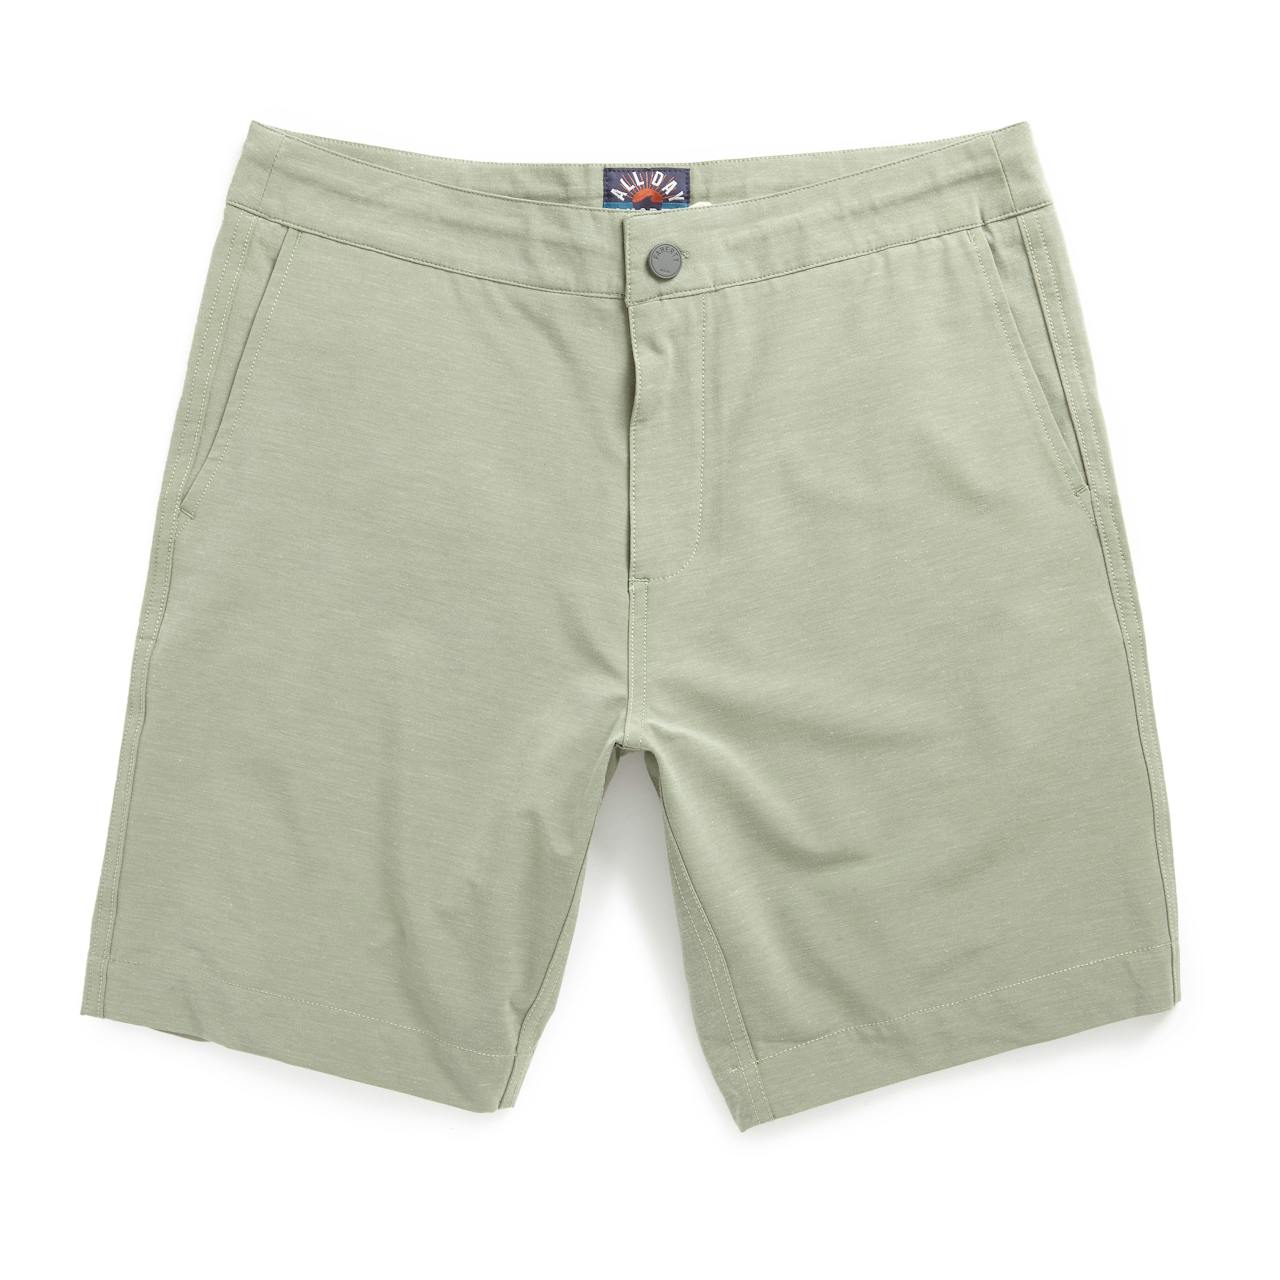 Faherty Brand All Day Short -9"